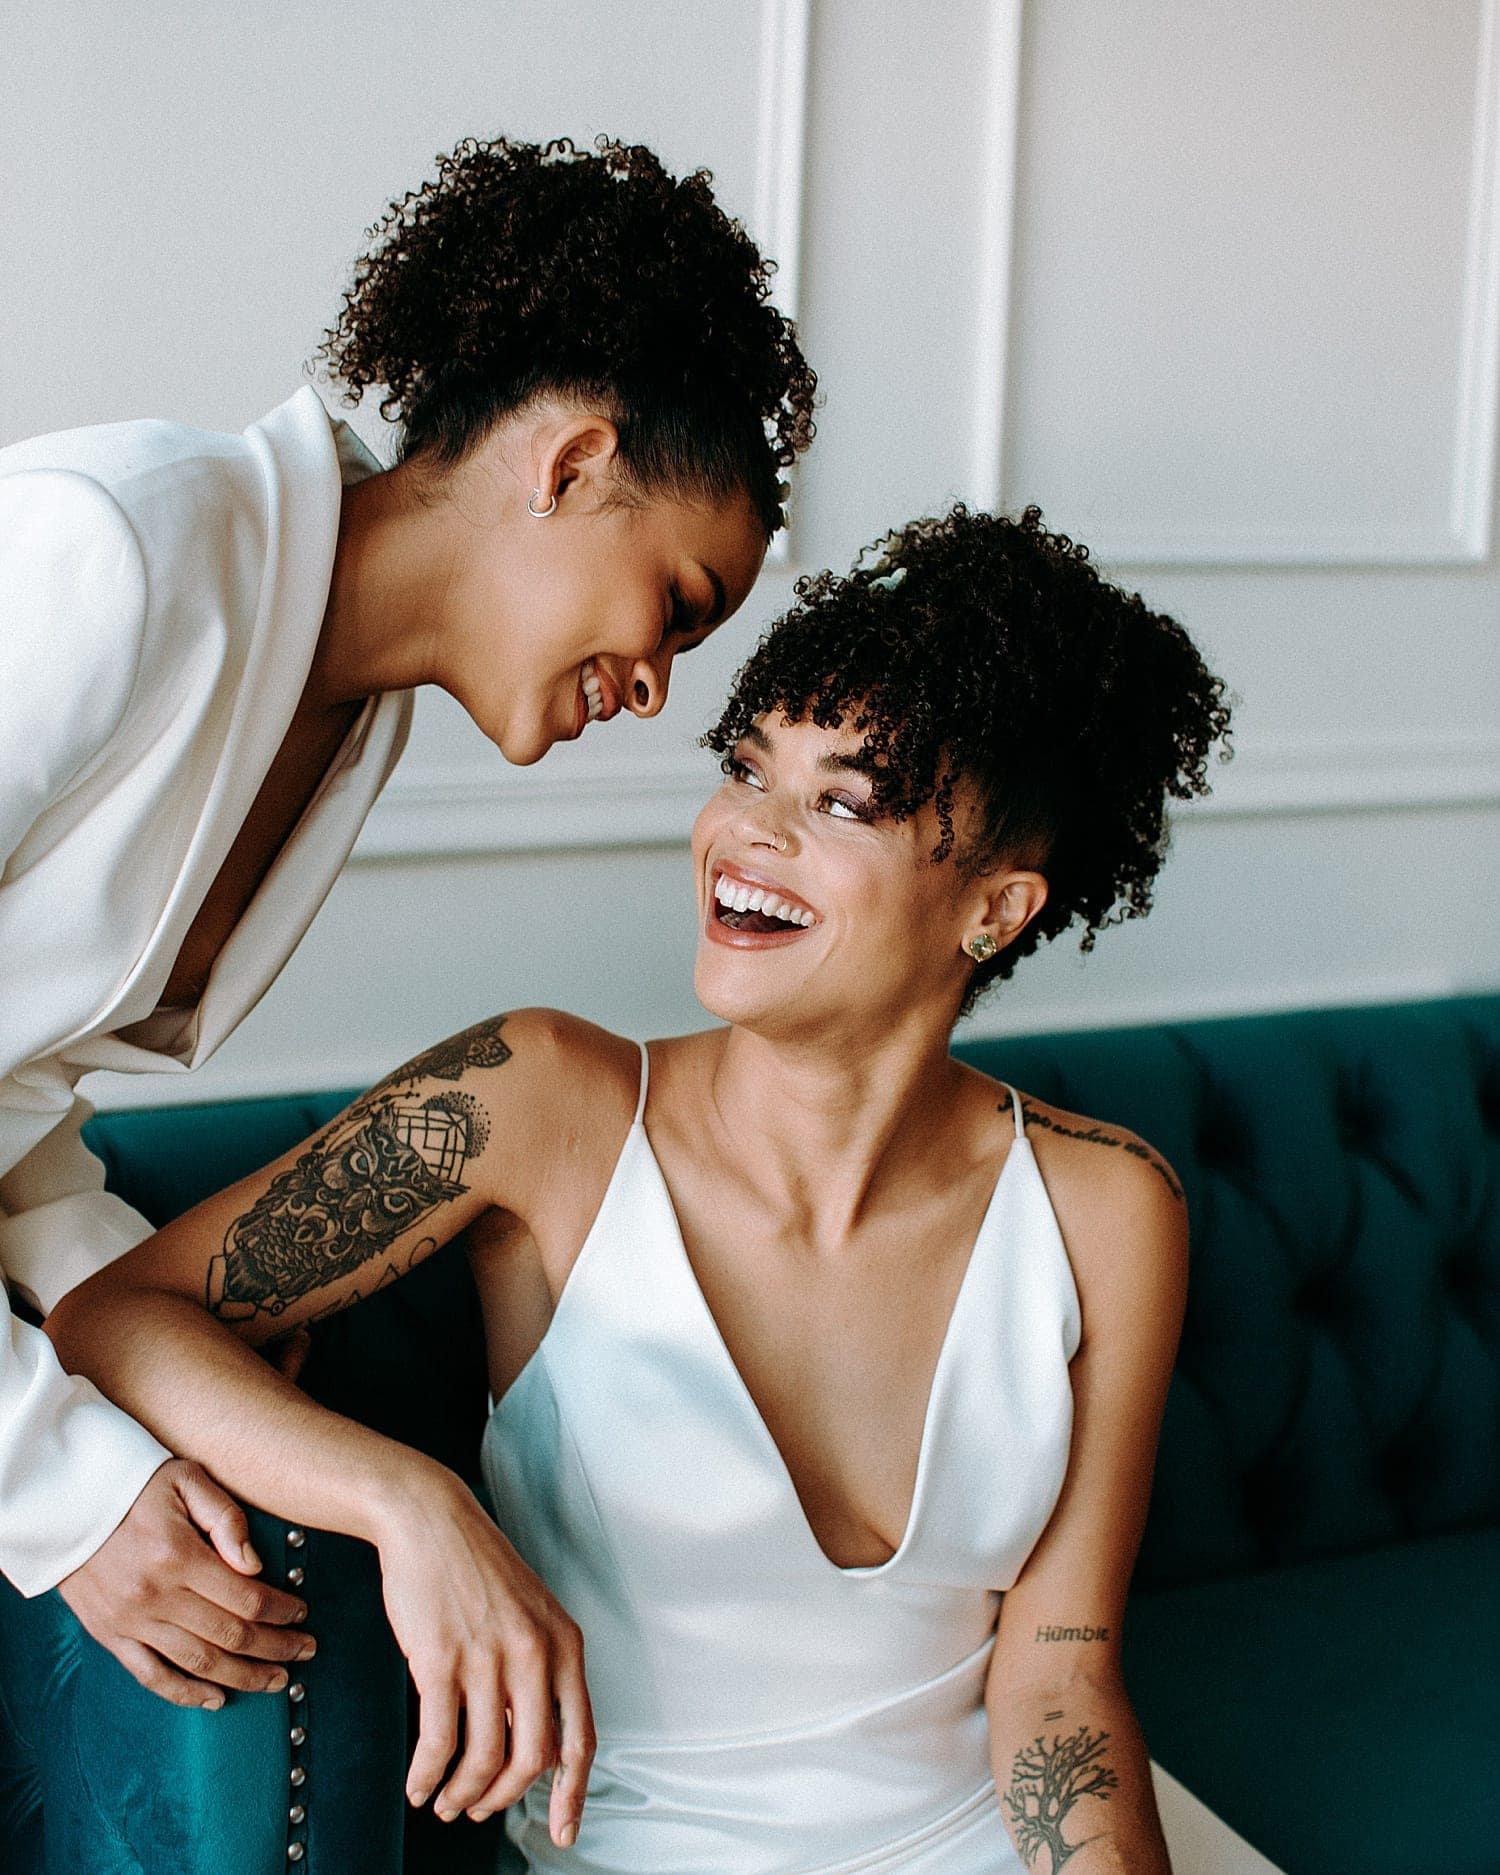 beautiful same sex lesbian lgbtq+ friendly wedding couple newlywed wearing all white gown and all white feminine suit portland wedding photography pricing by marcela pulido portland wedding photographer